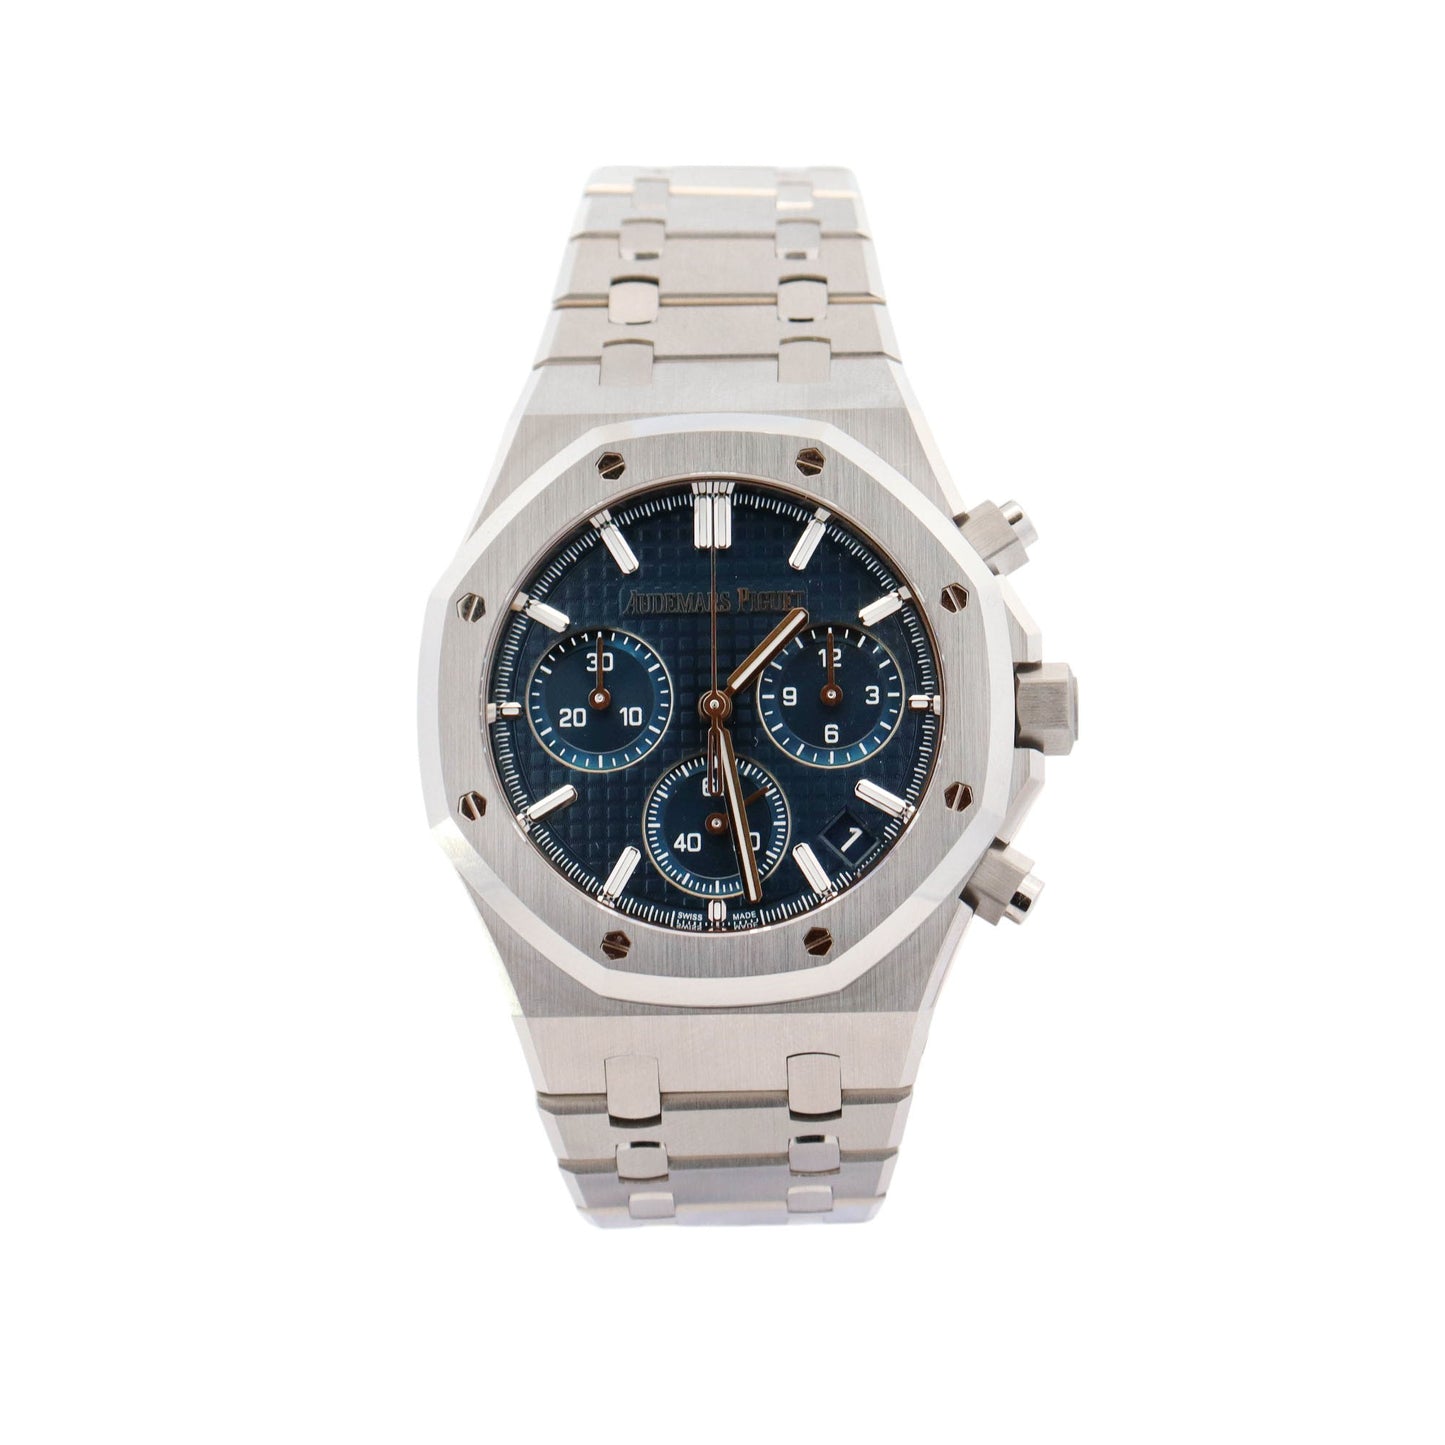 Audemars Piguet Royal Oak Stainless Steel 41mm Blue Chronograph Dial Watch Reference# 26240ST - Happy Jewelers Fine Jewelry Lifetime Warranty